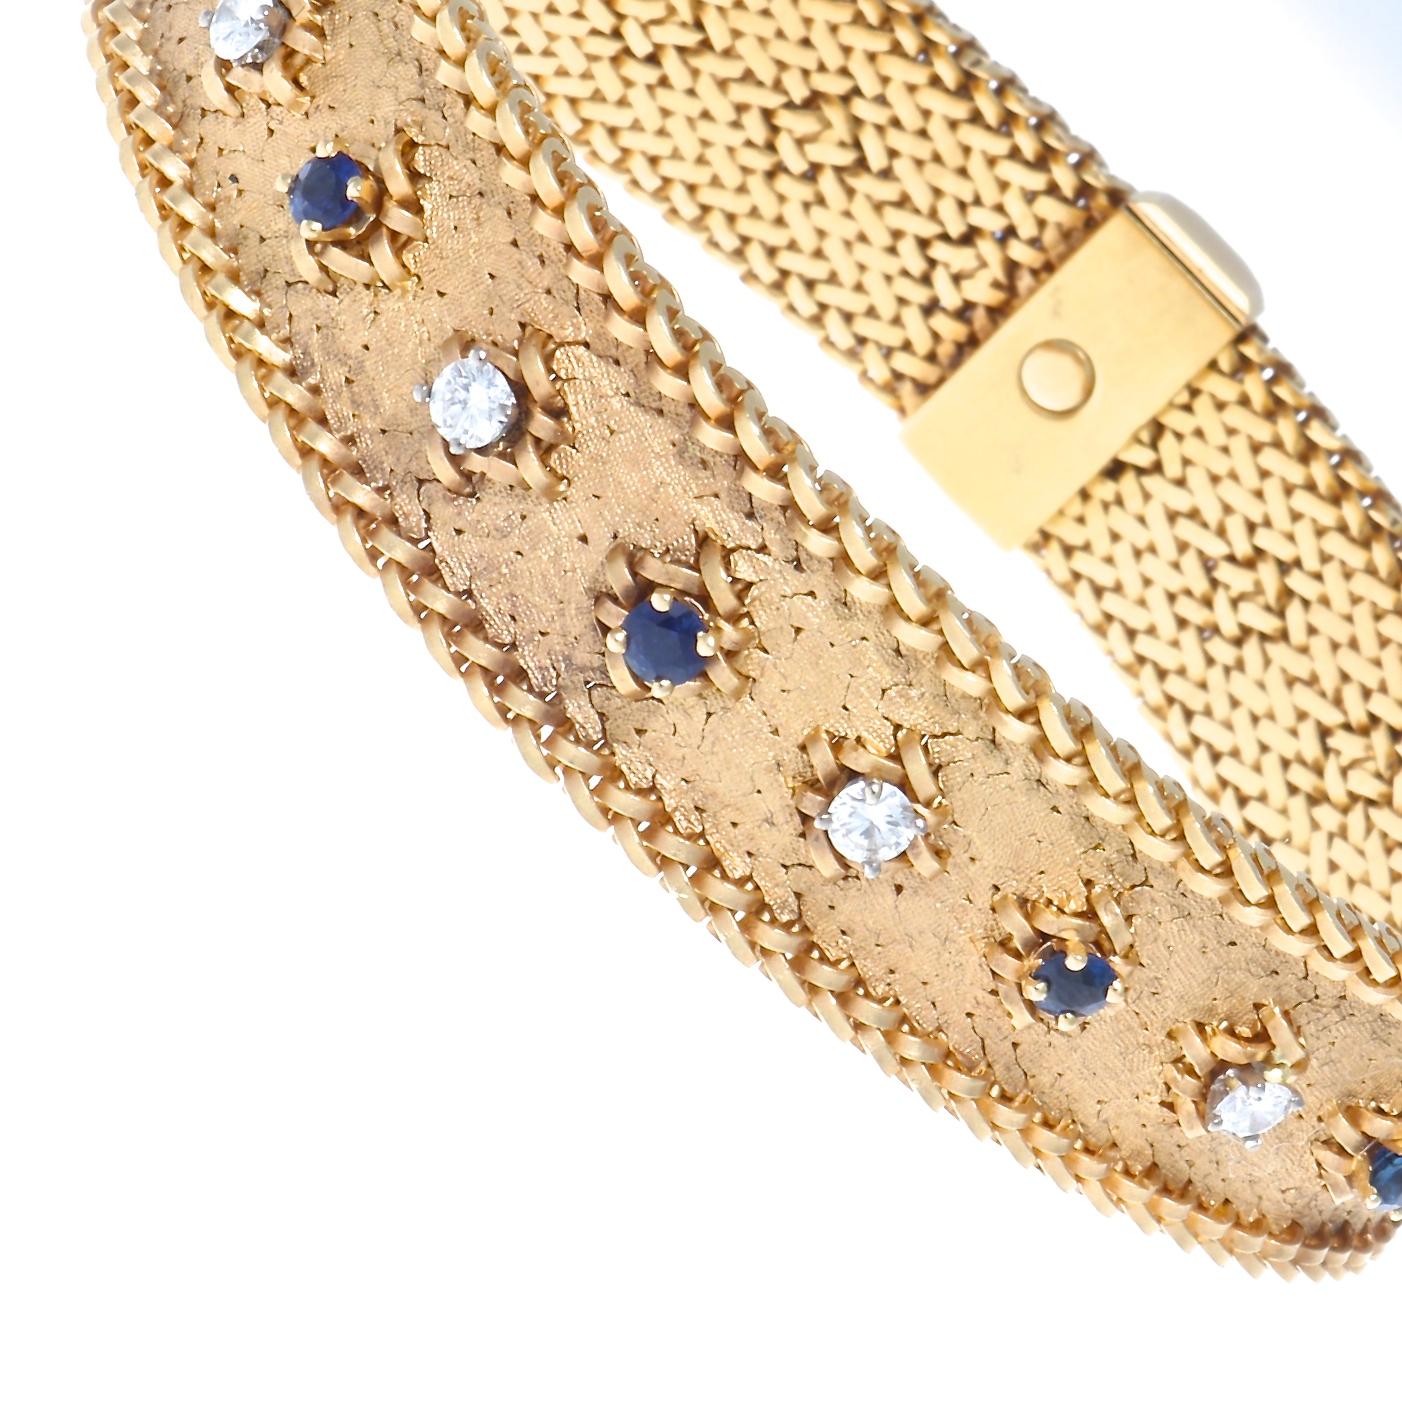 French George L'enfant diamond, sapphire and 18k yellow gold bracelet. Featuring 10 round brilliant cut diamonds that weigh approximately 1 carat, graded E-F color, VVS clarity. With 11 sapphires that weigh approximately 1.25 carats. 45.2 grams.